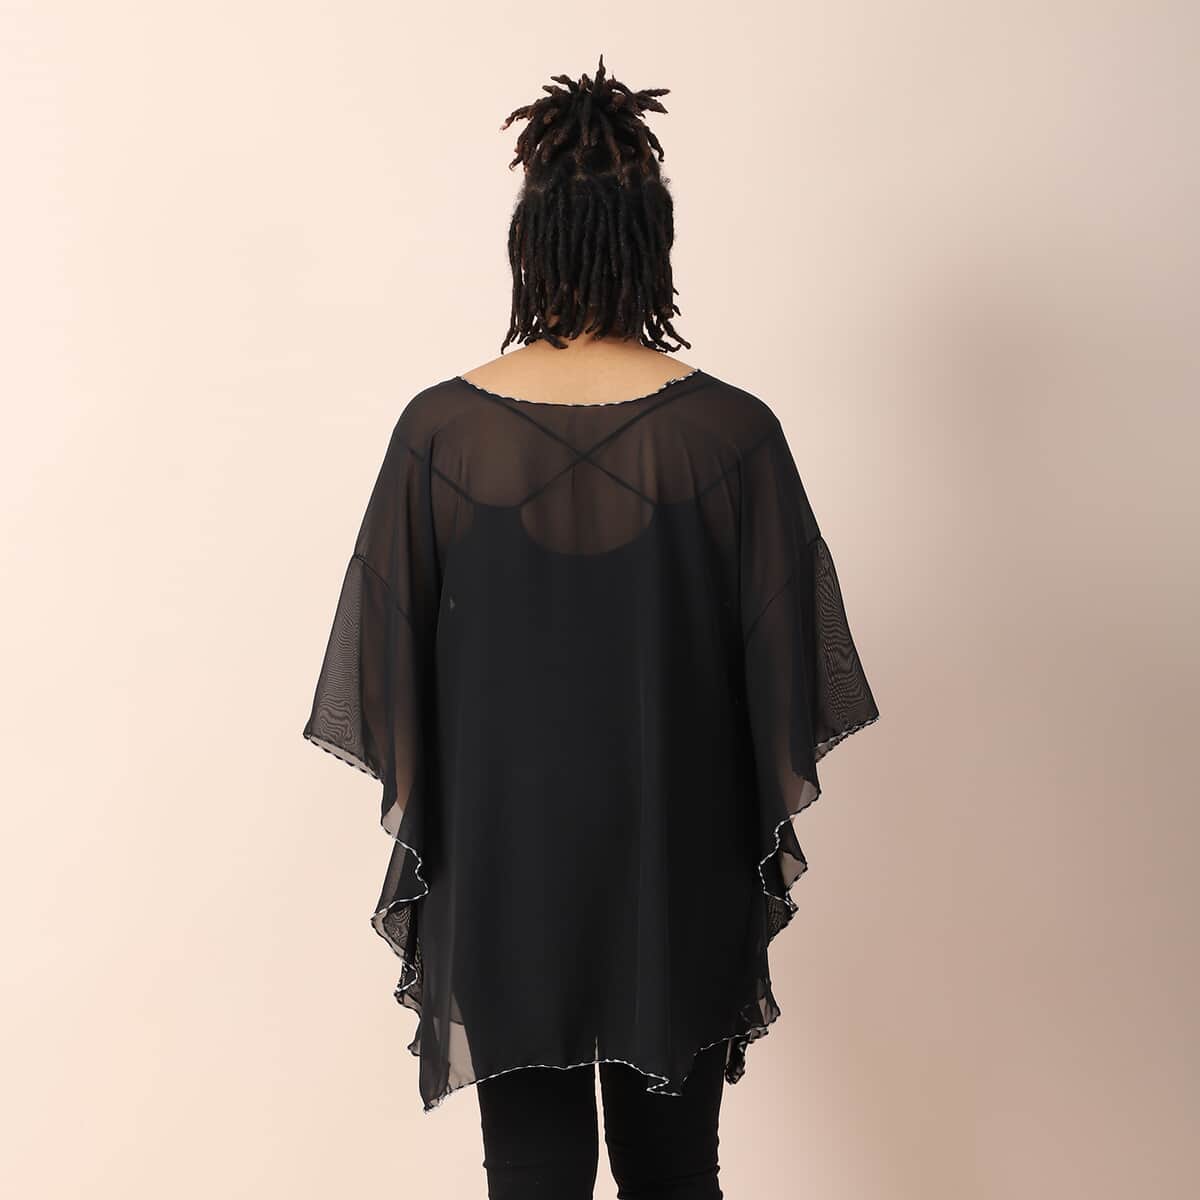 JOVIE Black Chiffon Kaftan with Contrast Hem and Neckline | Kaftan Top | Women's Top | Going Out Tops | Ladies Top | Blouses for Women image number 1